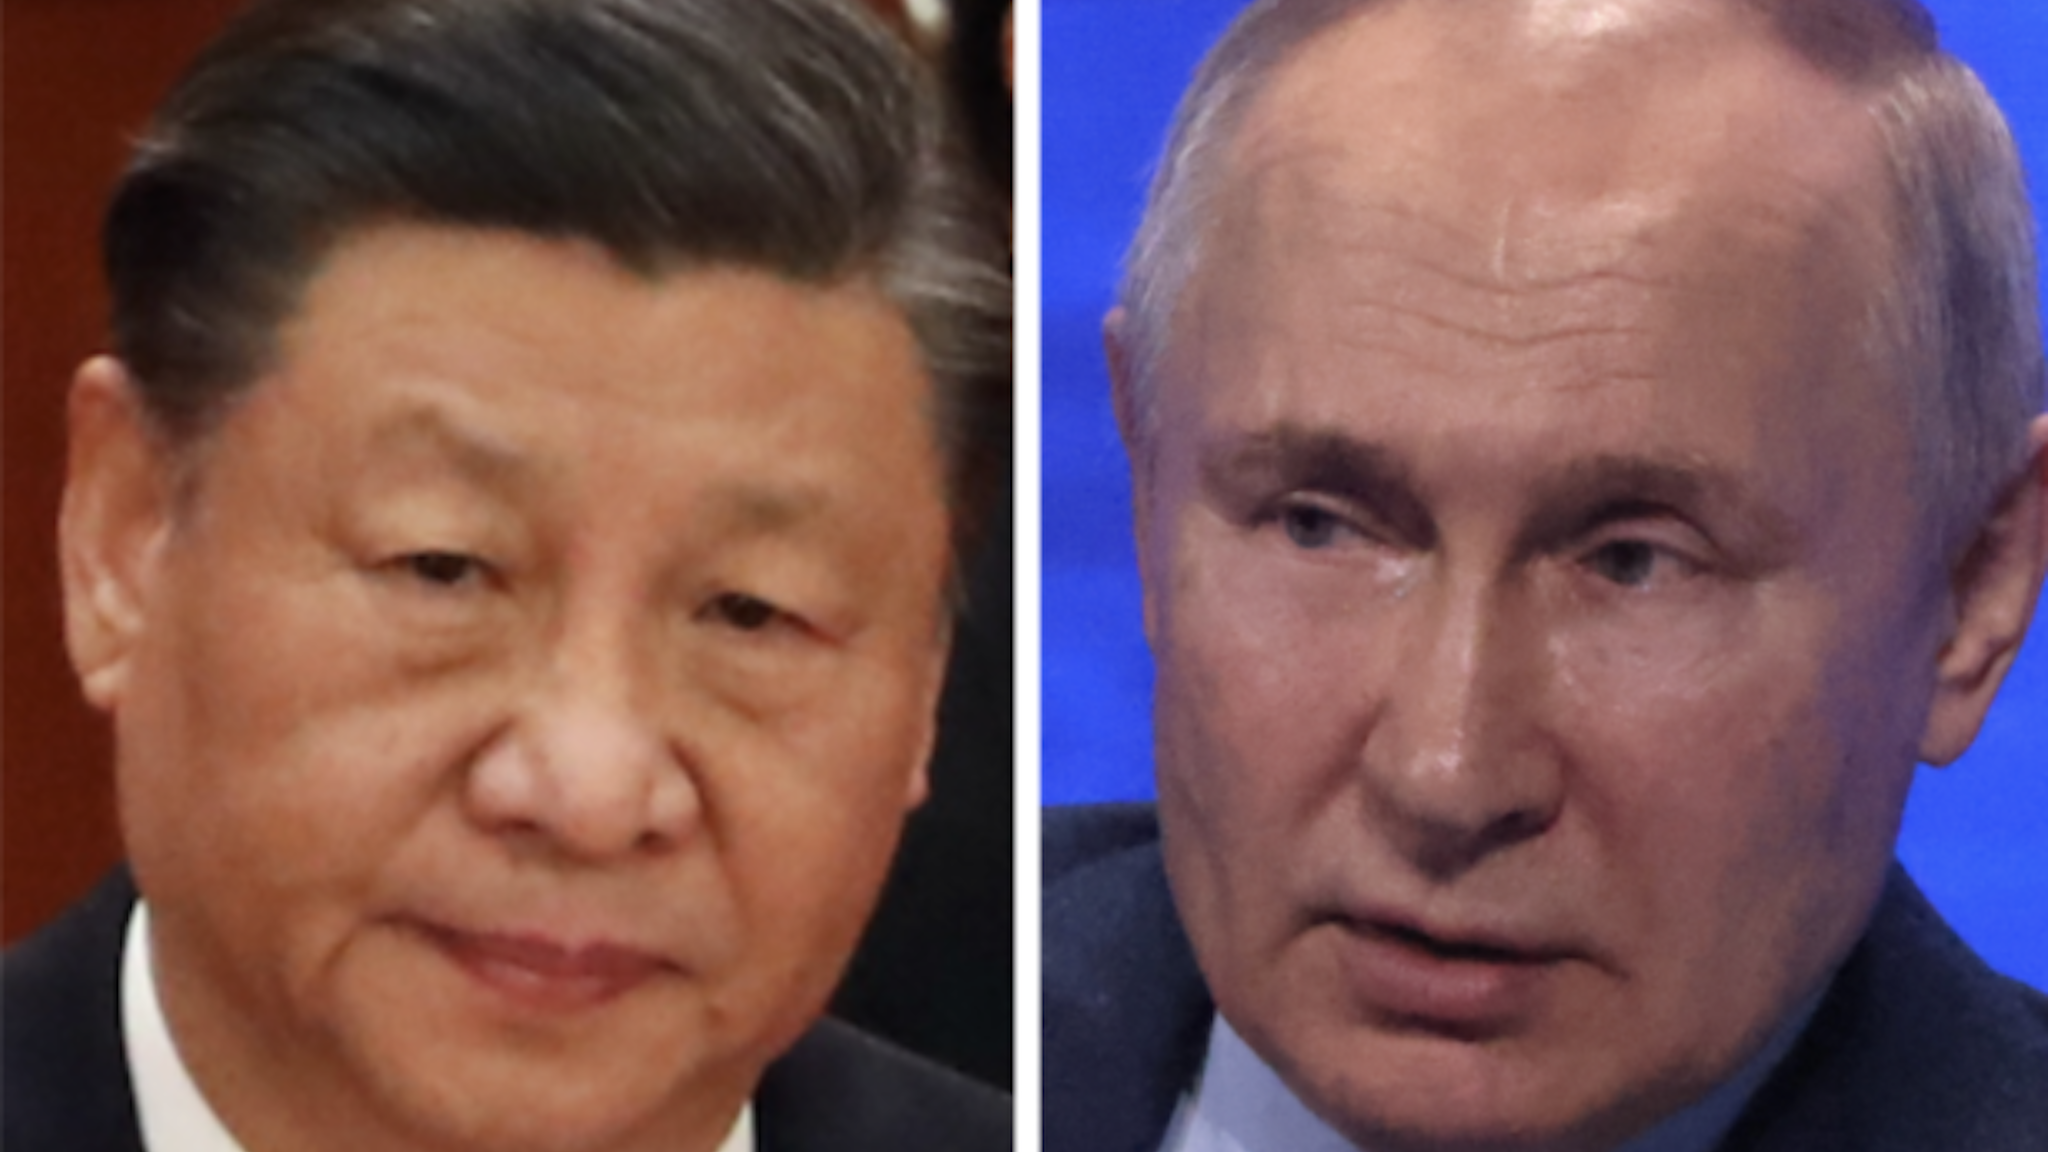 Chinese leader Xi Jinping arrived in Moscow Monday to meet with Russian President Vladimir Putin on what Beijing labeled a “mission of peace.”